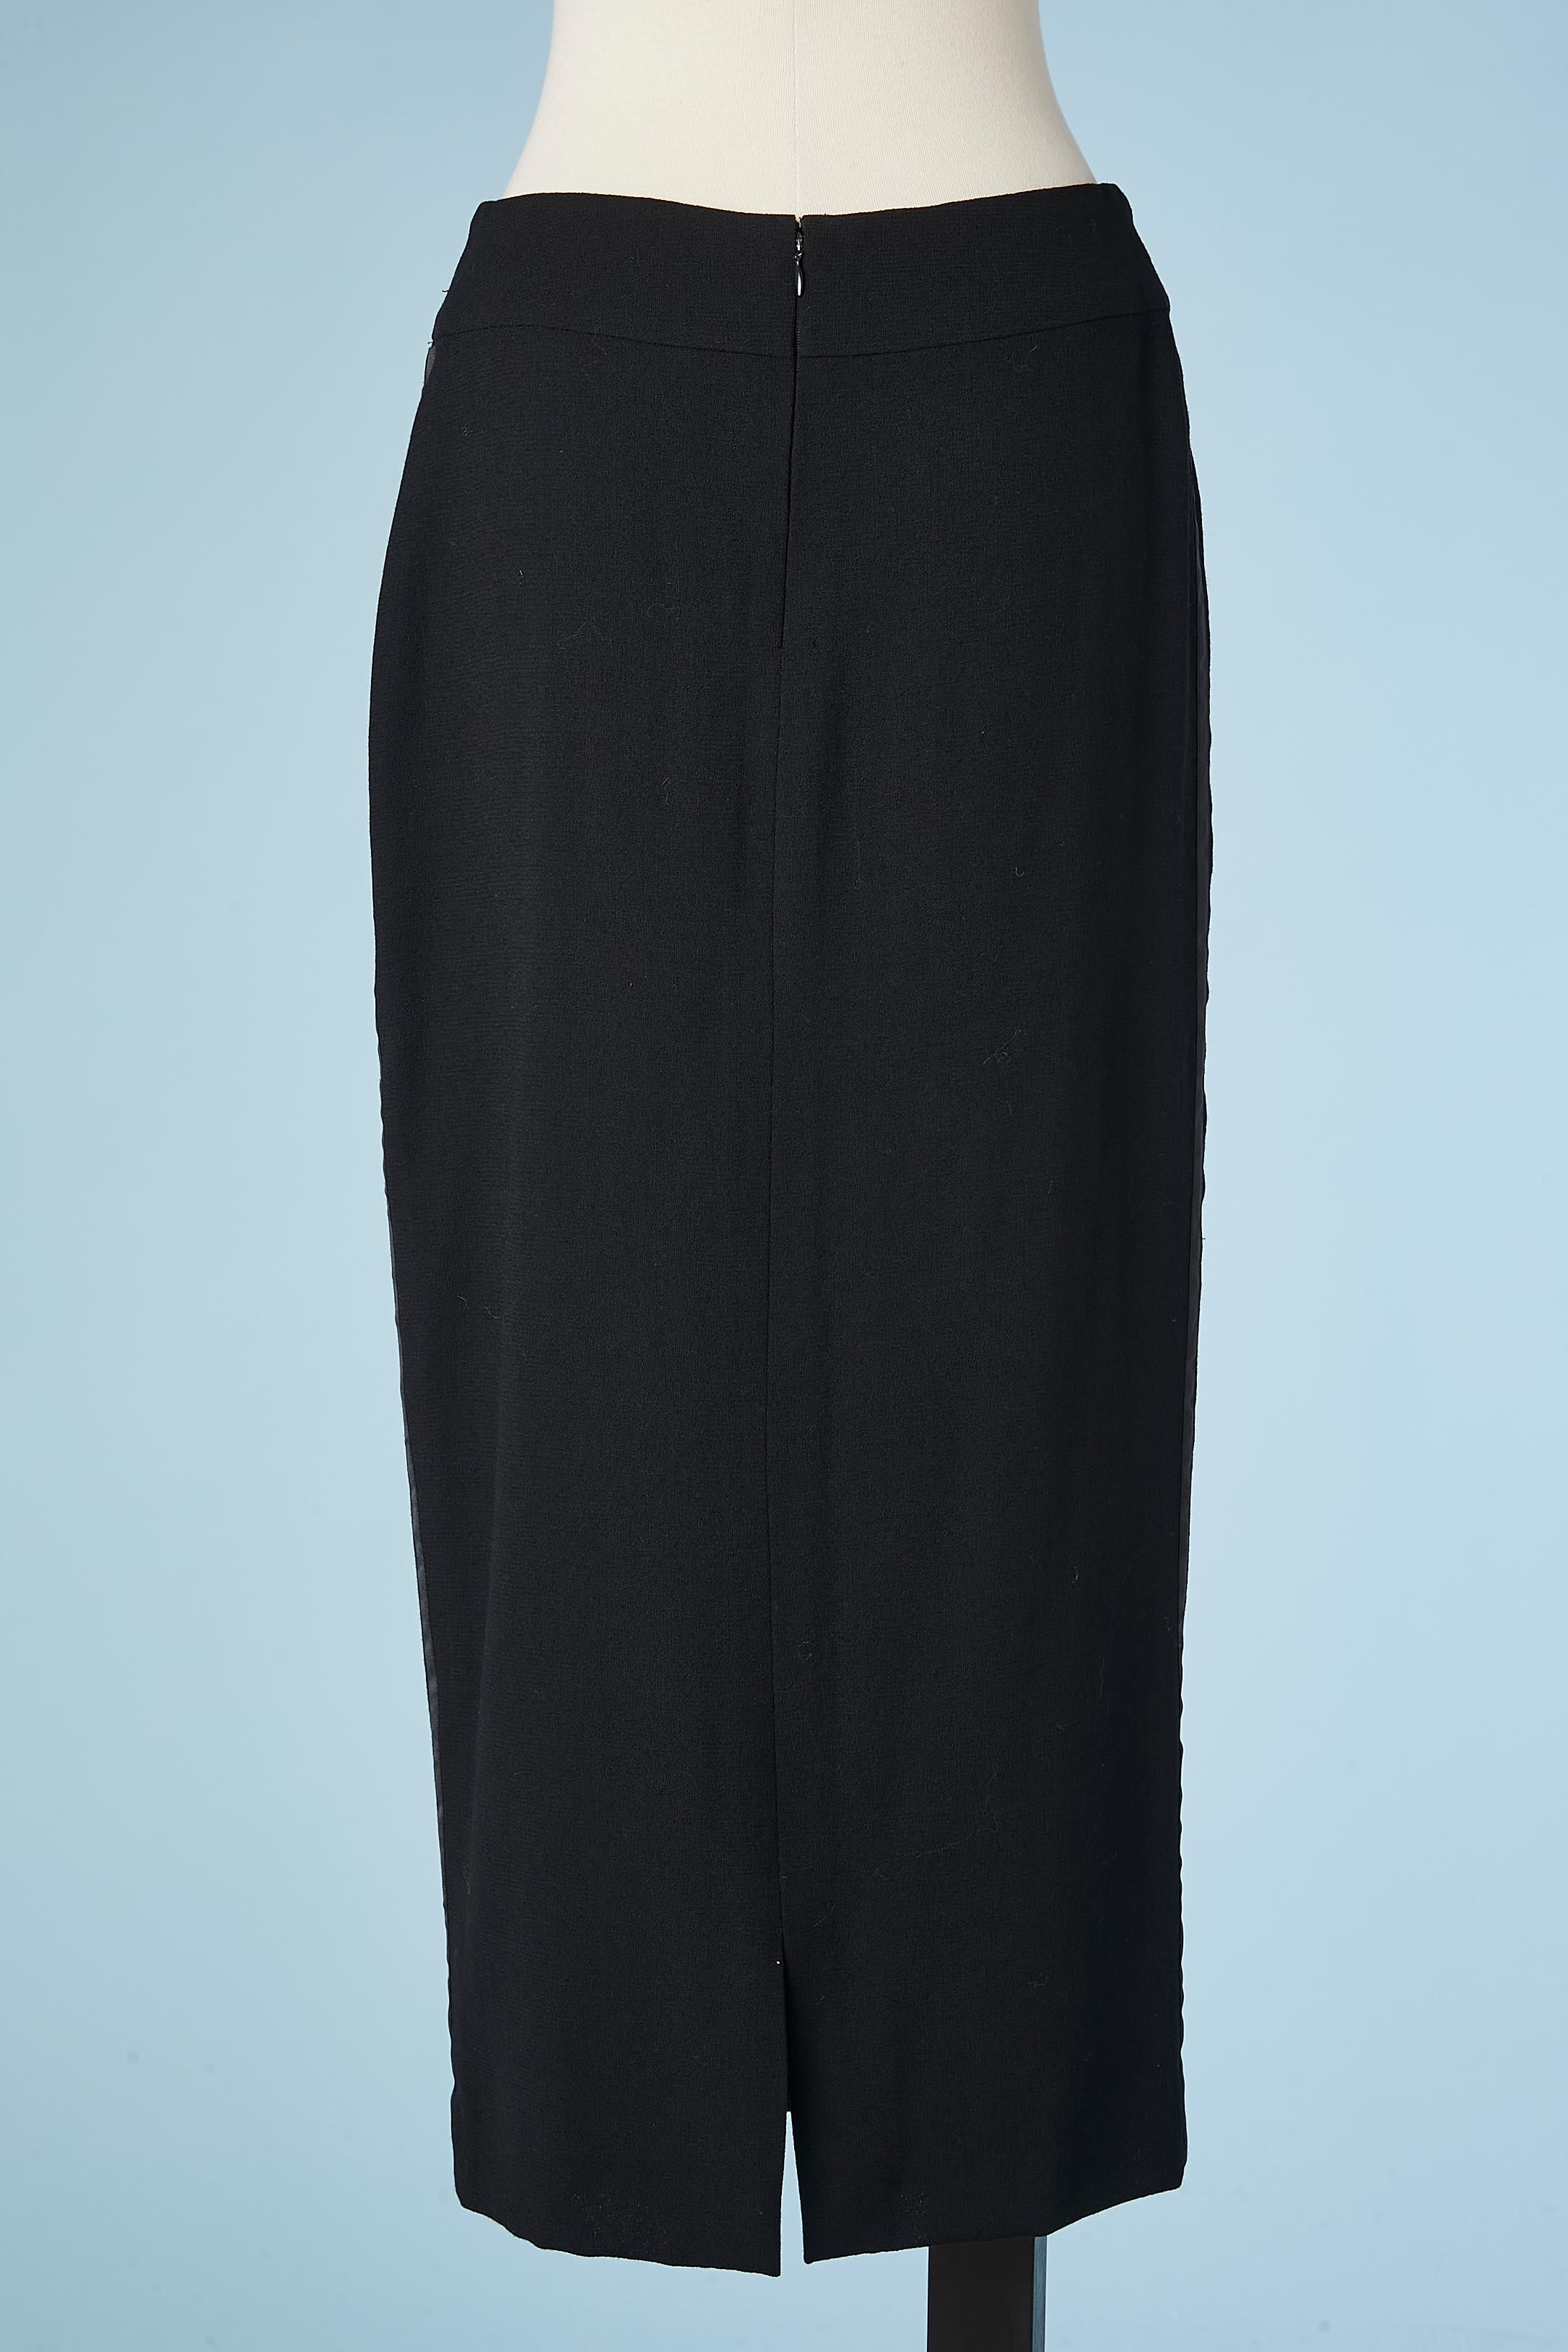 Long tuxedo black wool pencil skirt with silk branded lining Chanel  In Excellent Condition For Sale In Saint-Ouen-Sur-Seine, FR